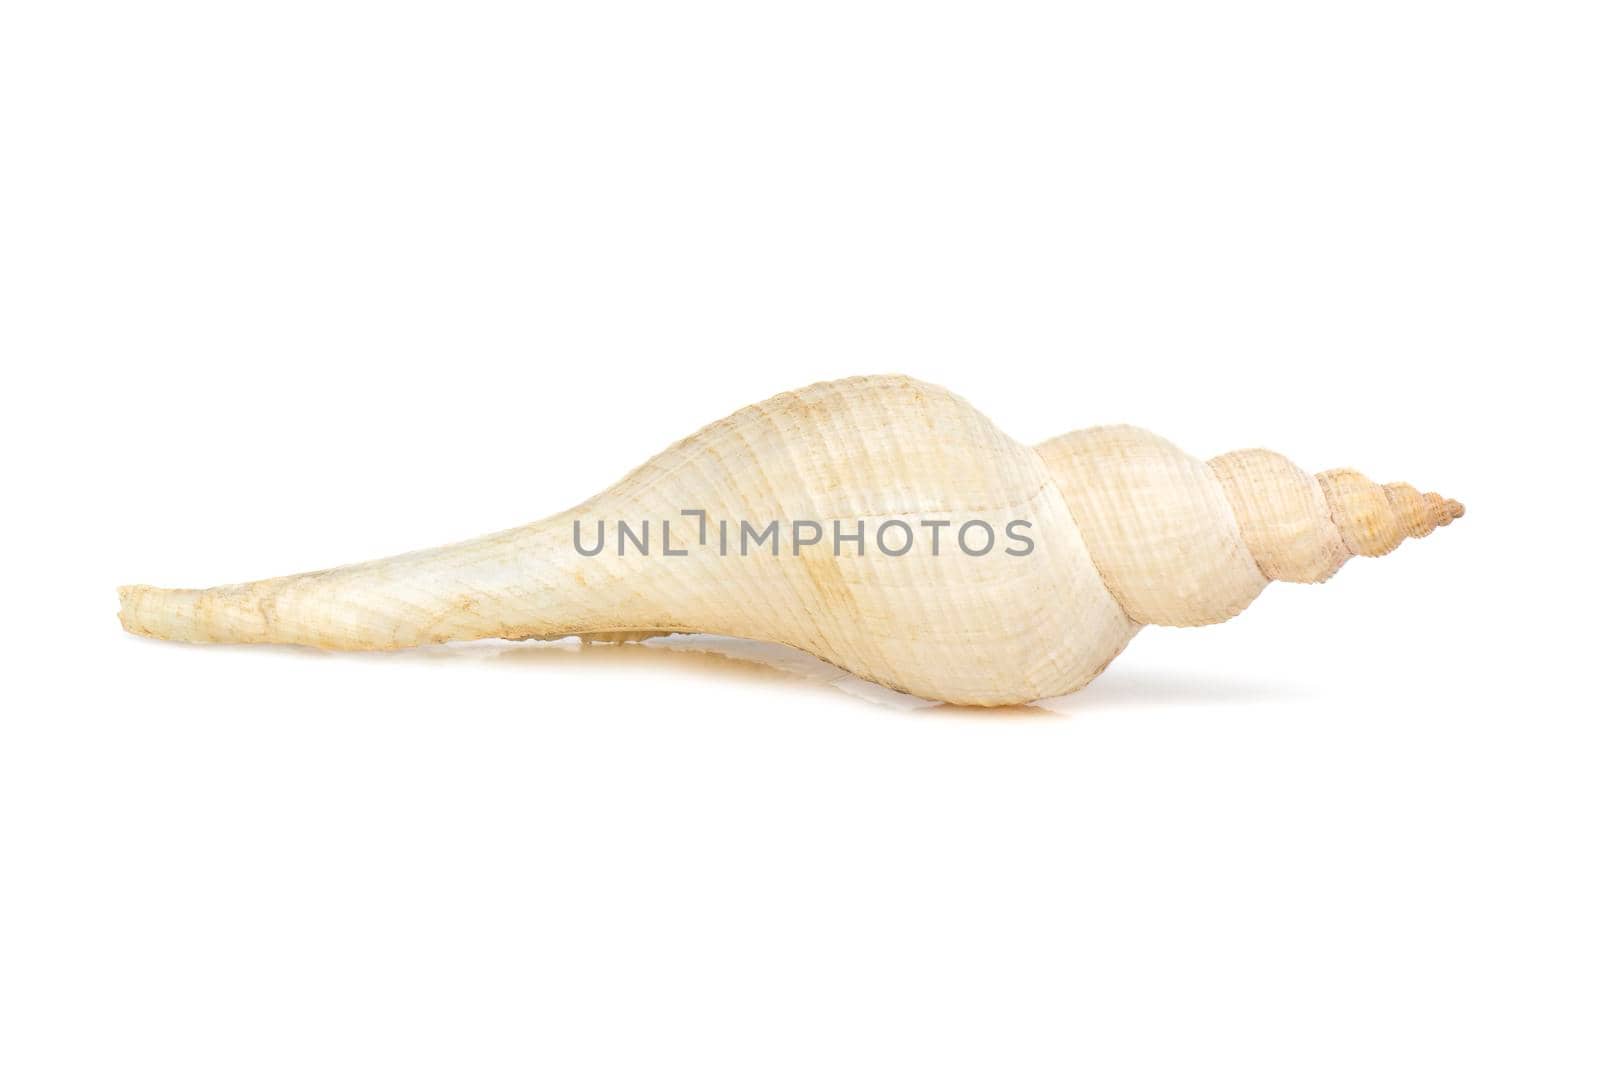 Image of white long tailed spindle conch seashells on a white background. Undersea Animals. Sea Shells. by yod67